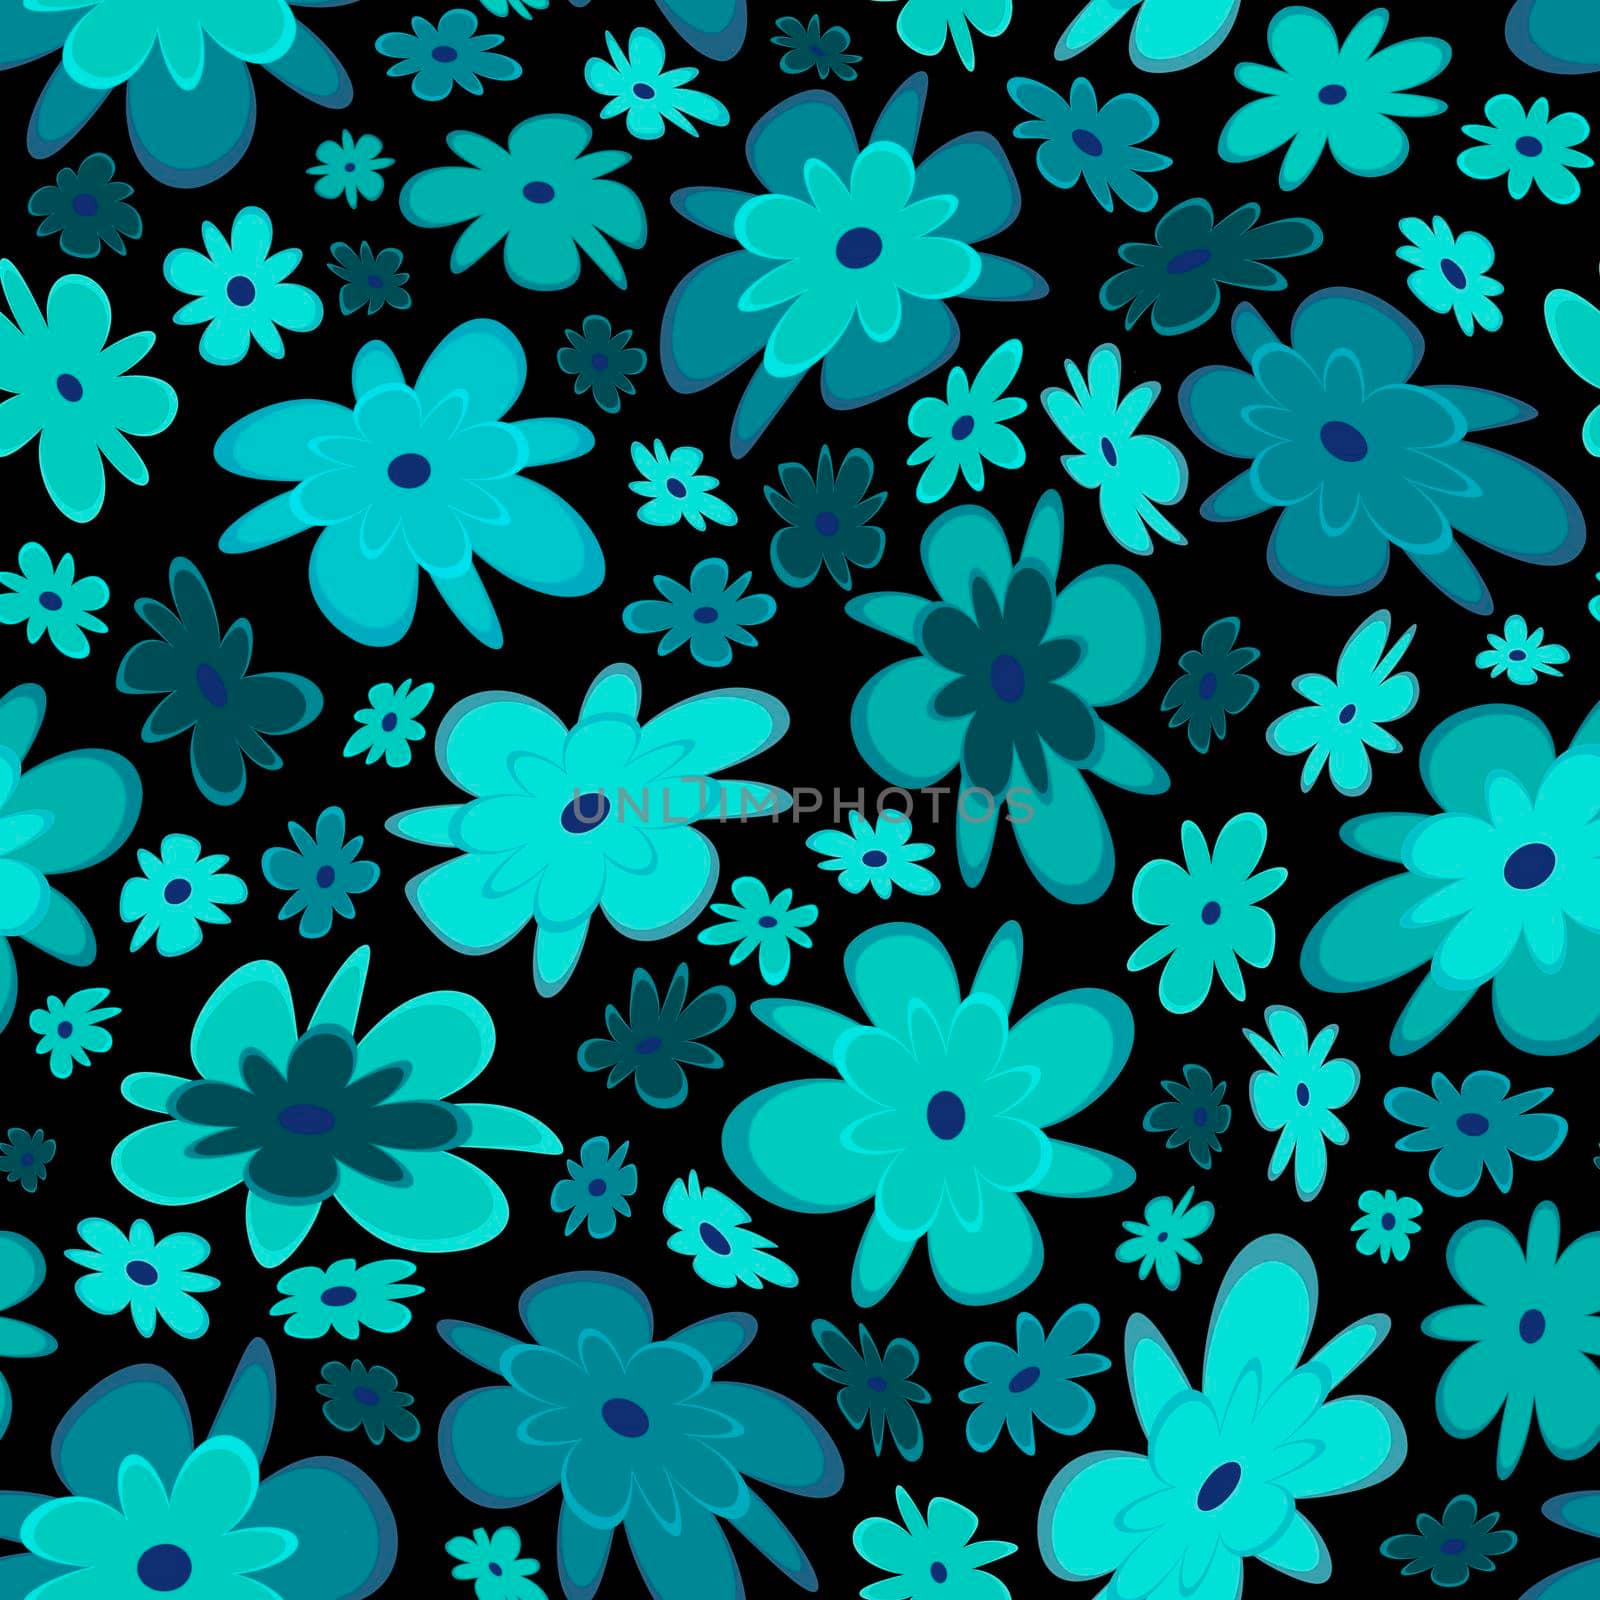 Trendy fabric pattern with miniature flowers.Summer print.Fashion design.Motifs scattered random.Elegant template for fashion prints.Azure on black.Good for fashion,textile,fabric,gift wrapping paper